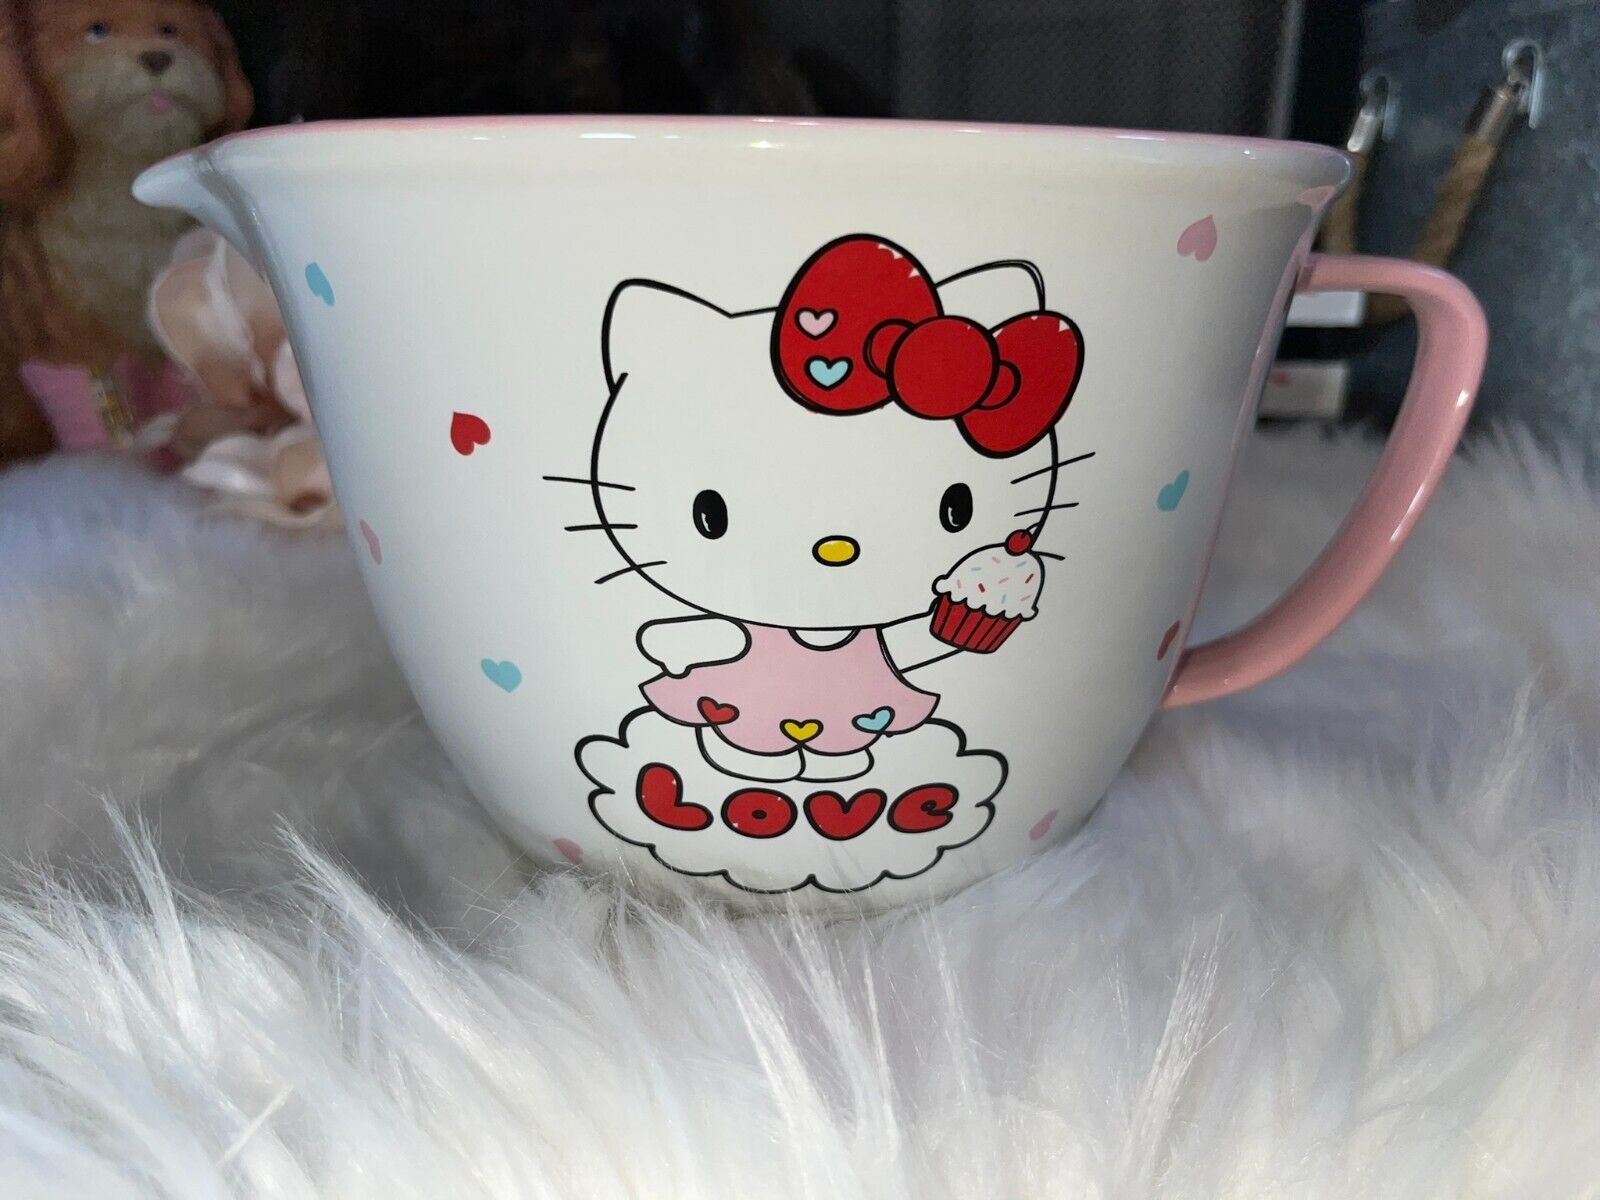 New Hello Kitty Ceramic Mixing Bowl Pink Trim Cupcake Love By Zrike Brands